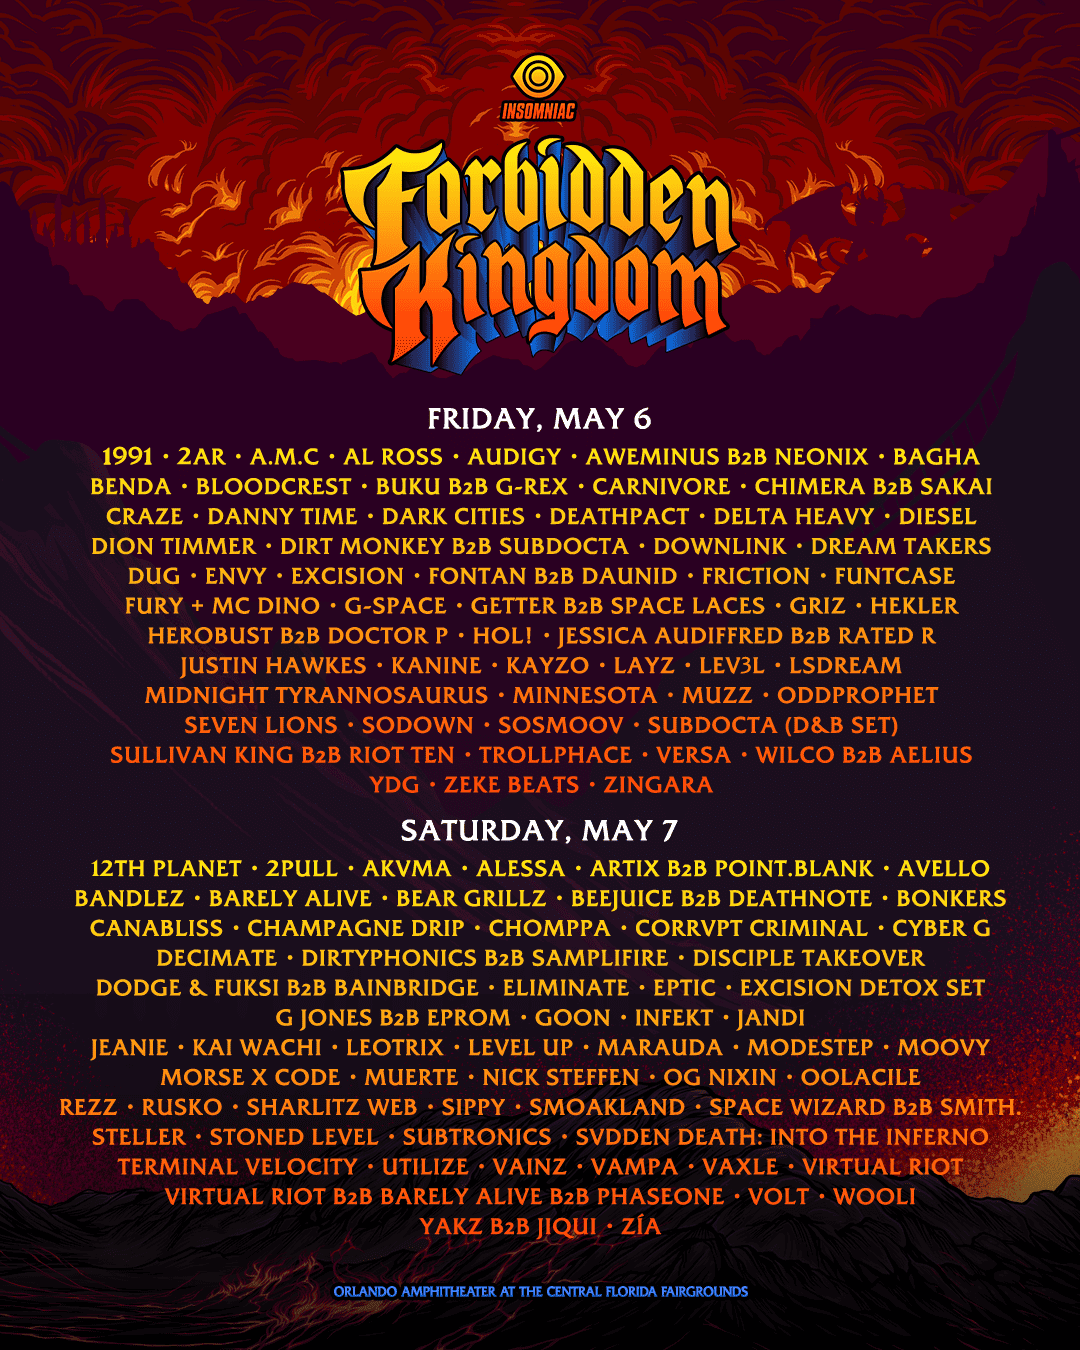 The Ultimate Guide To Forbidden Kingdom Music Festival